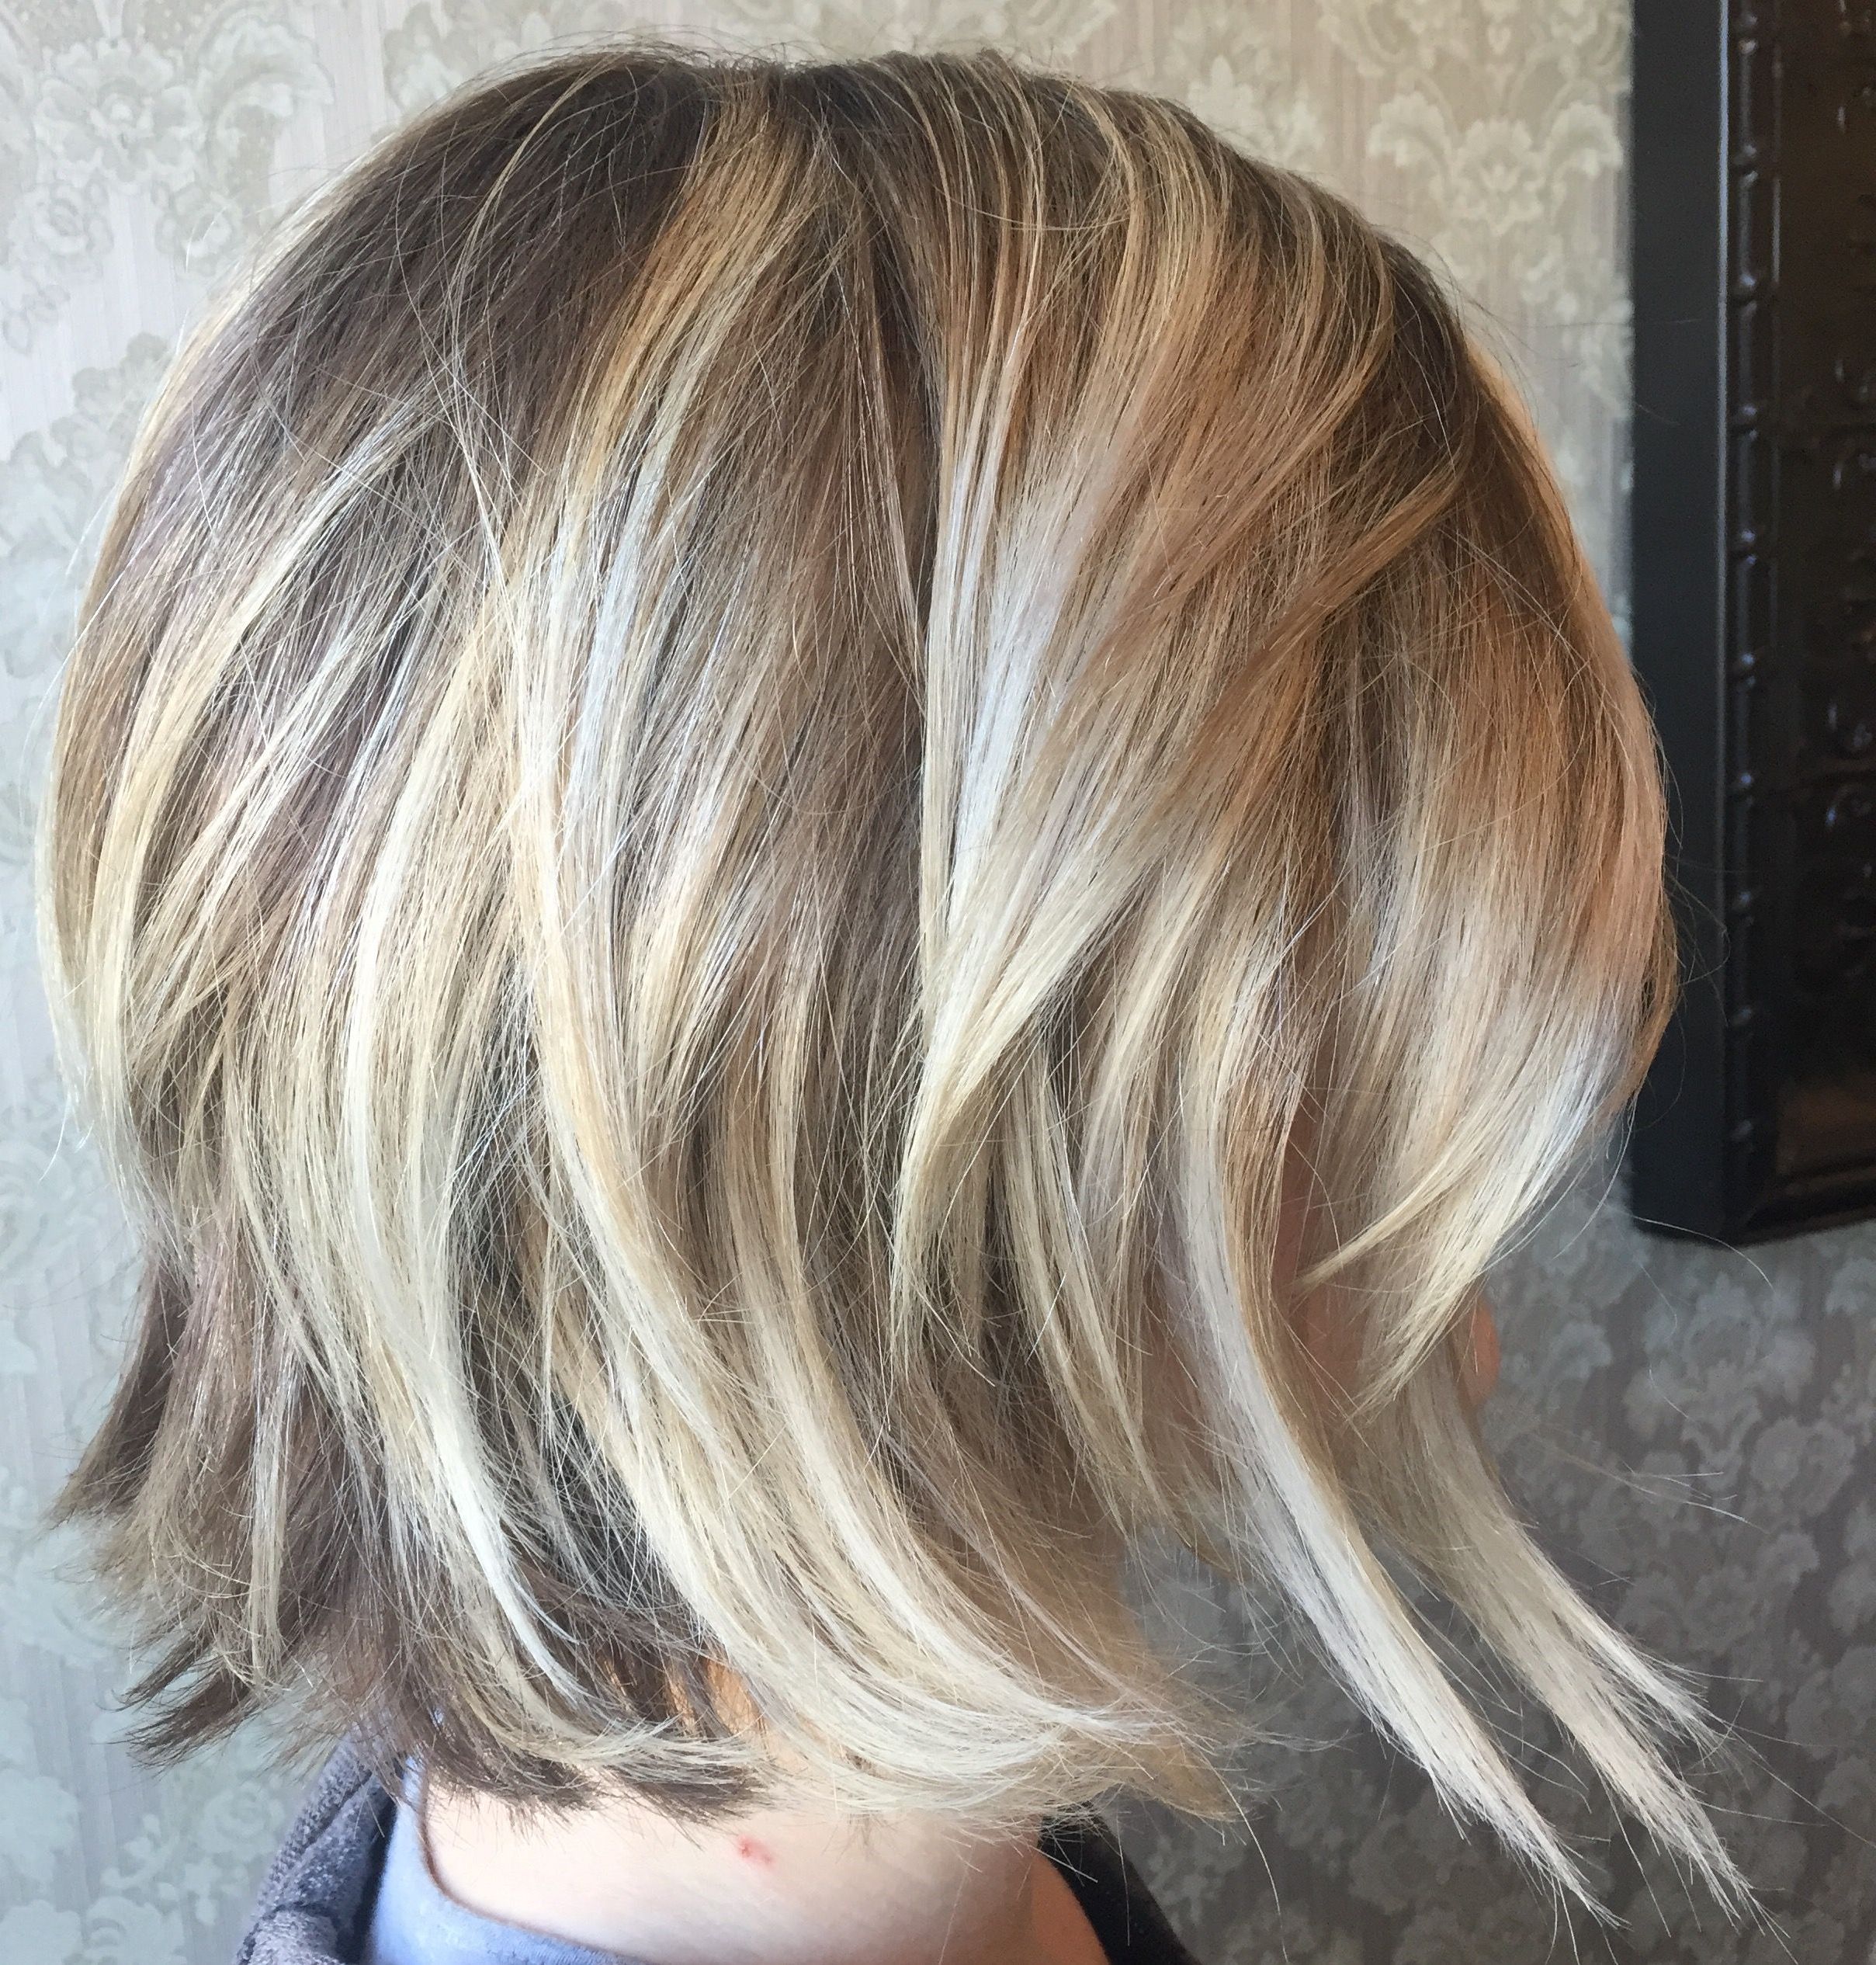 Blonde On Blonde Balayage Highlights, Angled Bob Haircut, Platinum Intended For Blonde Balayage Bob Hairstyles With Angled Layers (Gallery 2 of 20)